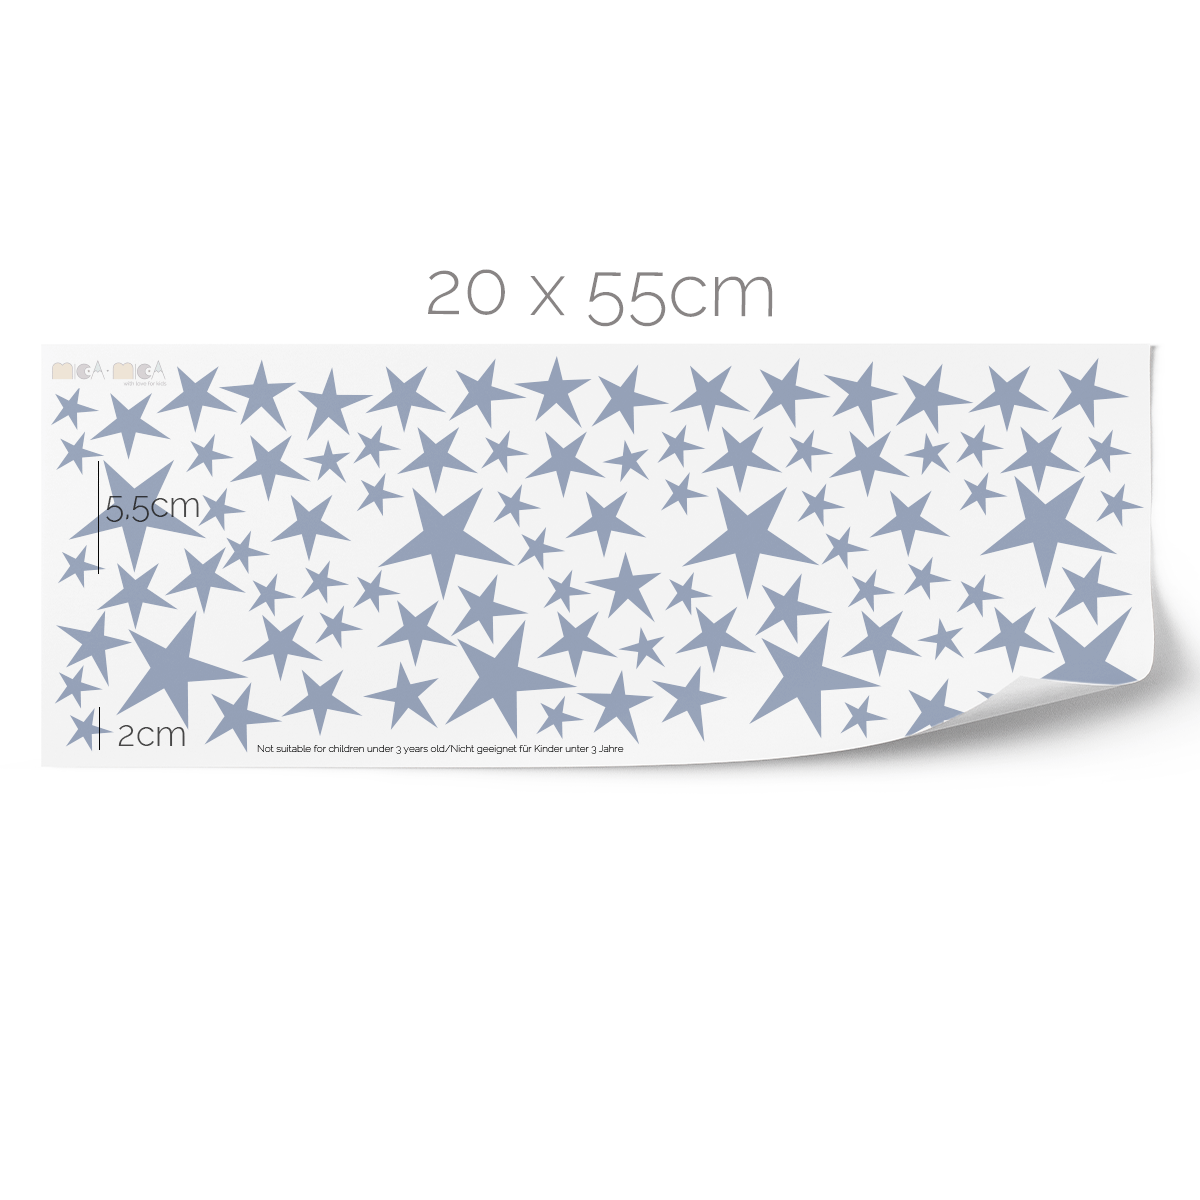 Space wall sticker - Moon with stars